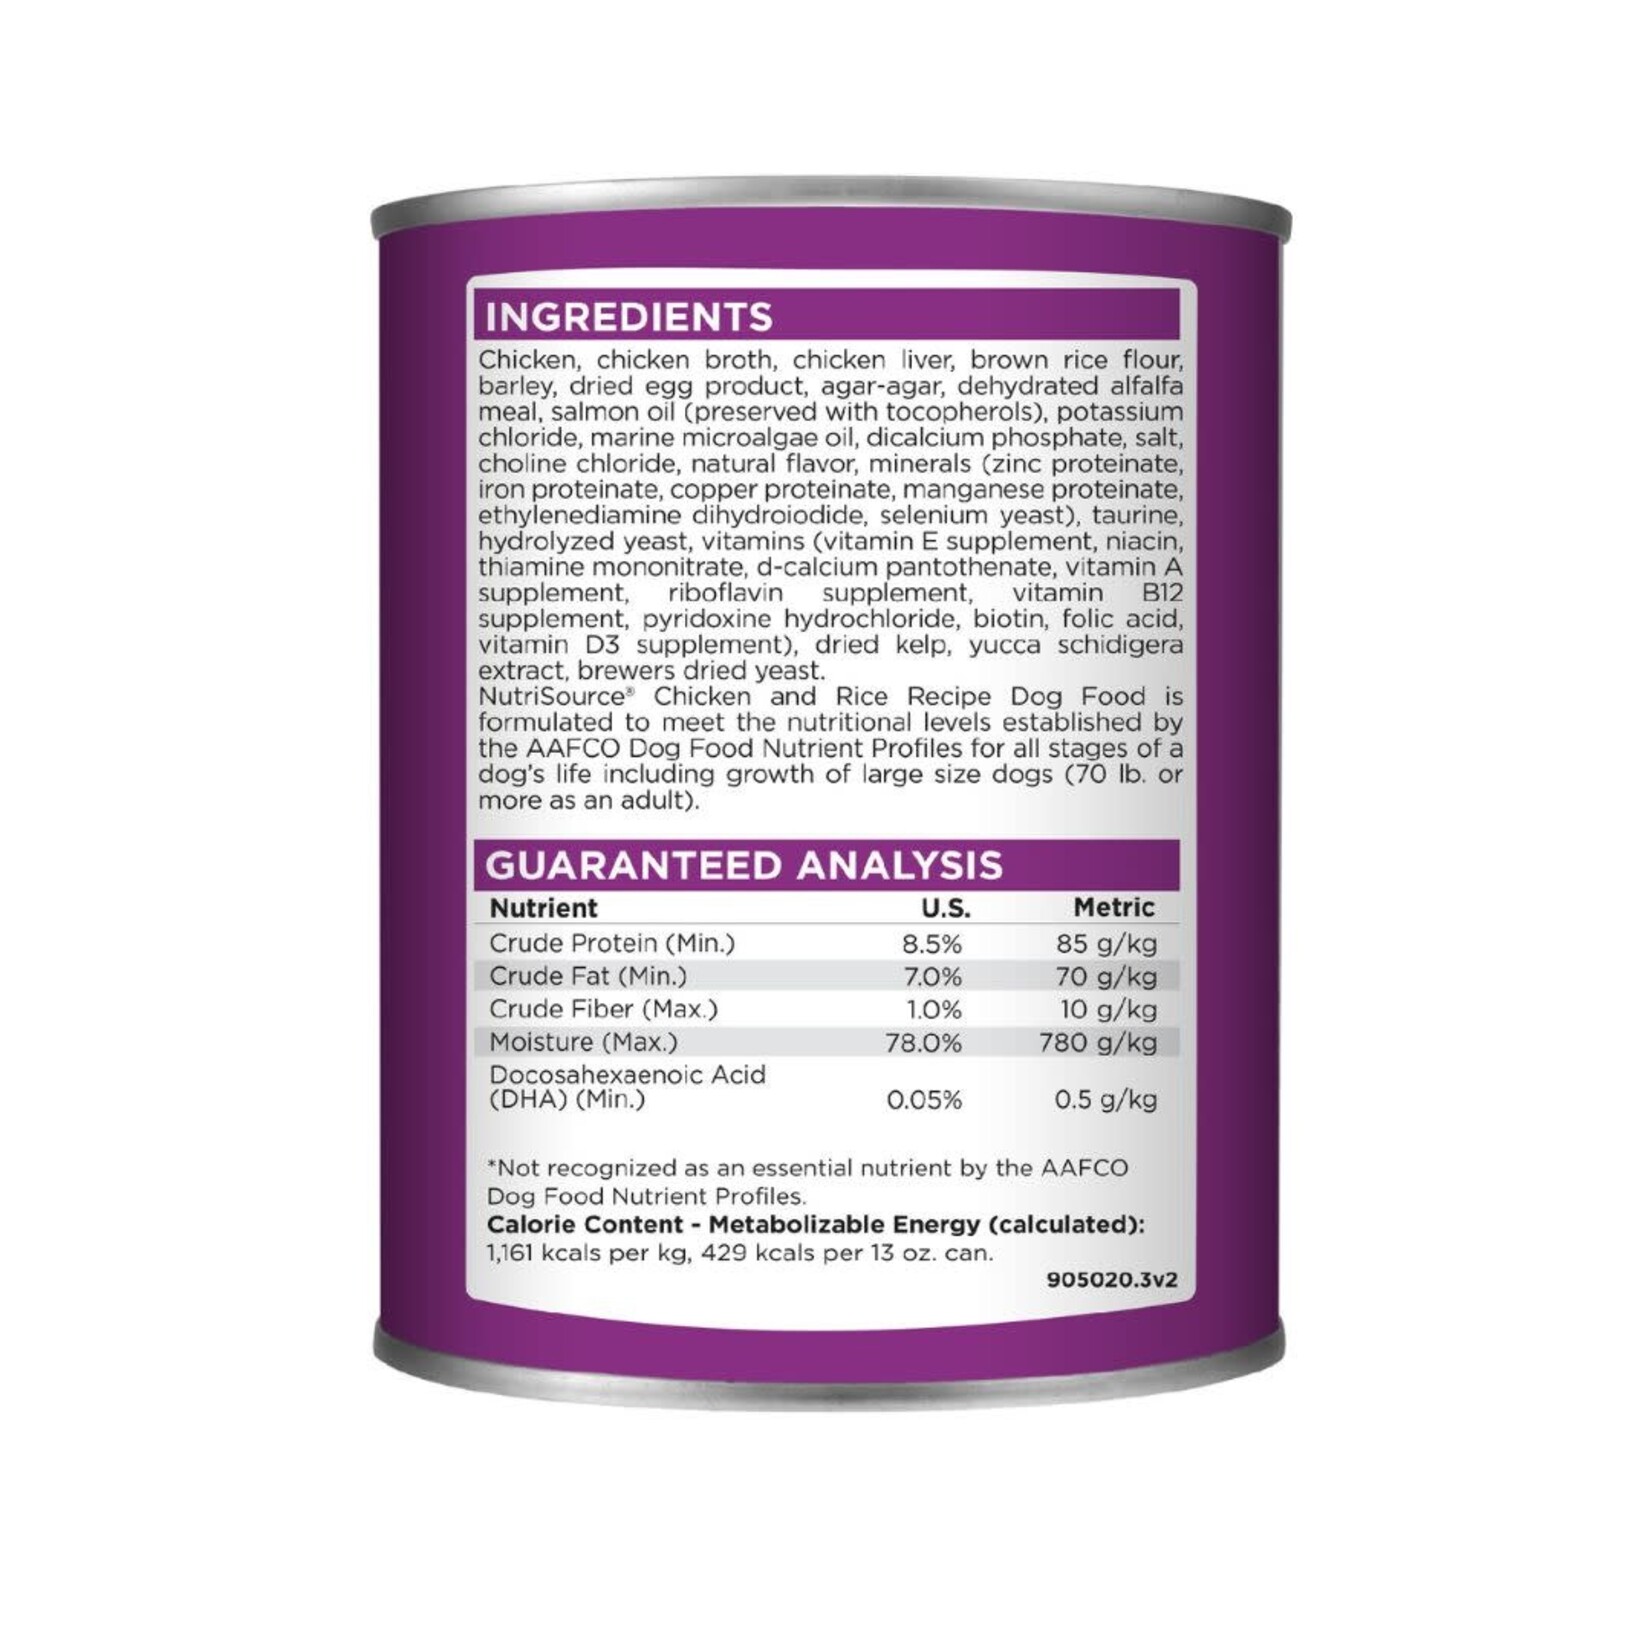 NutriSource NutriSource Puppy Canned Dog Food